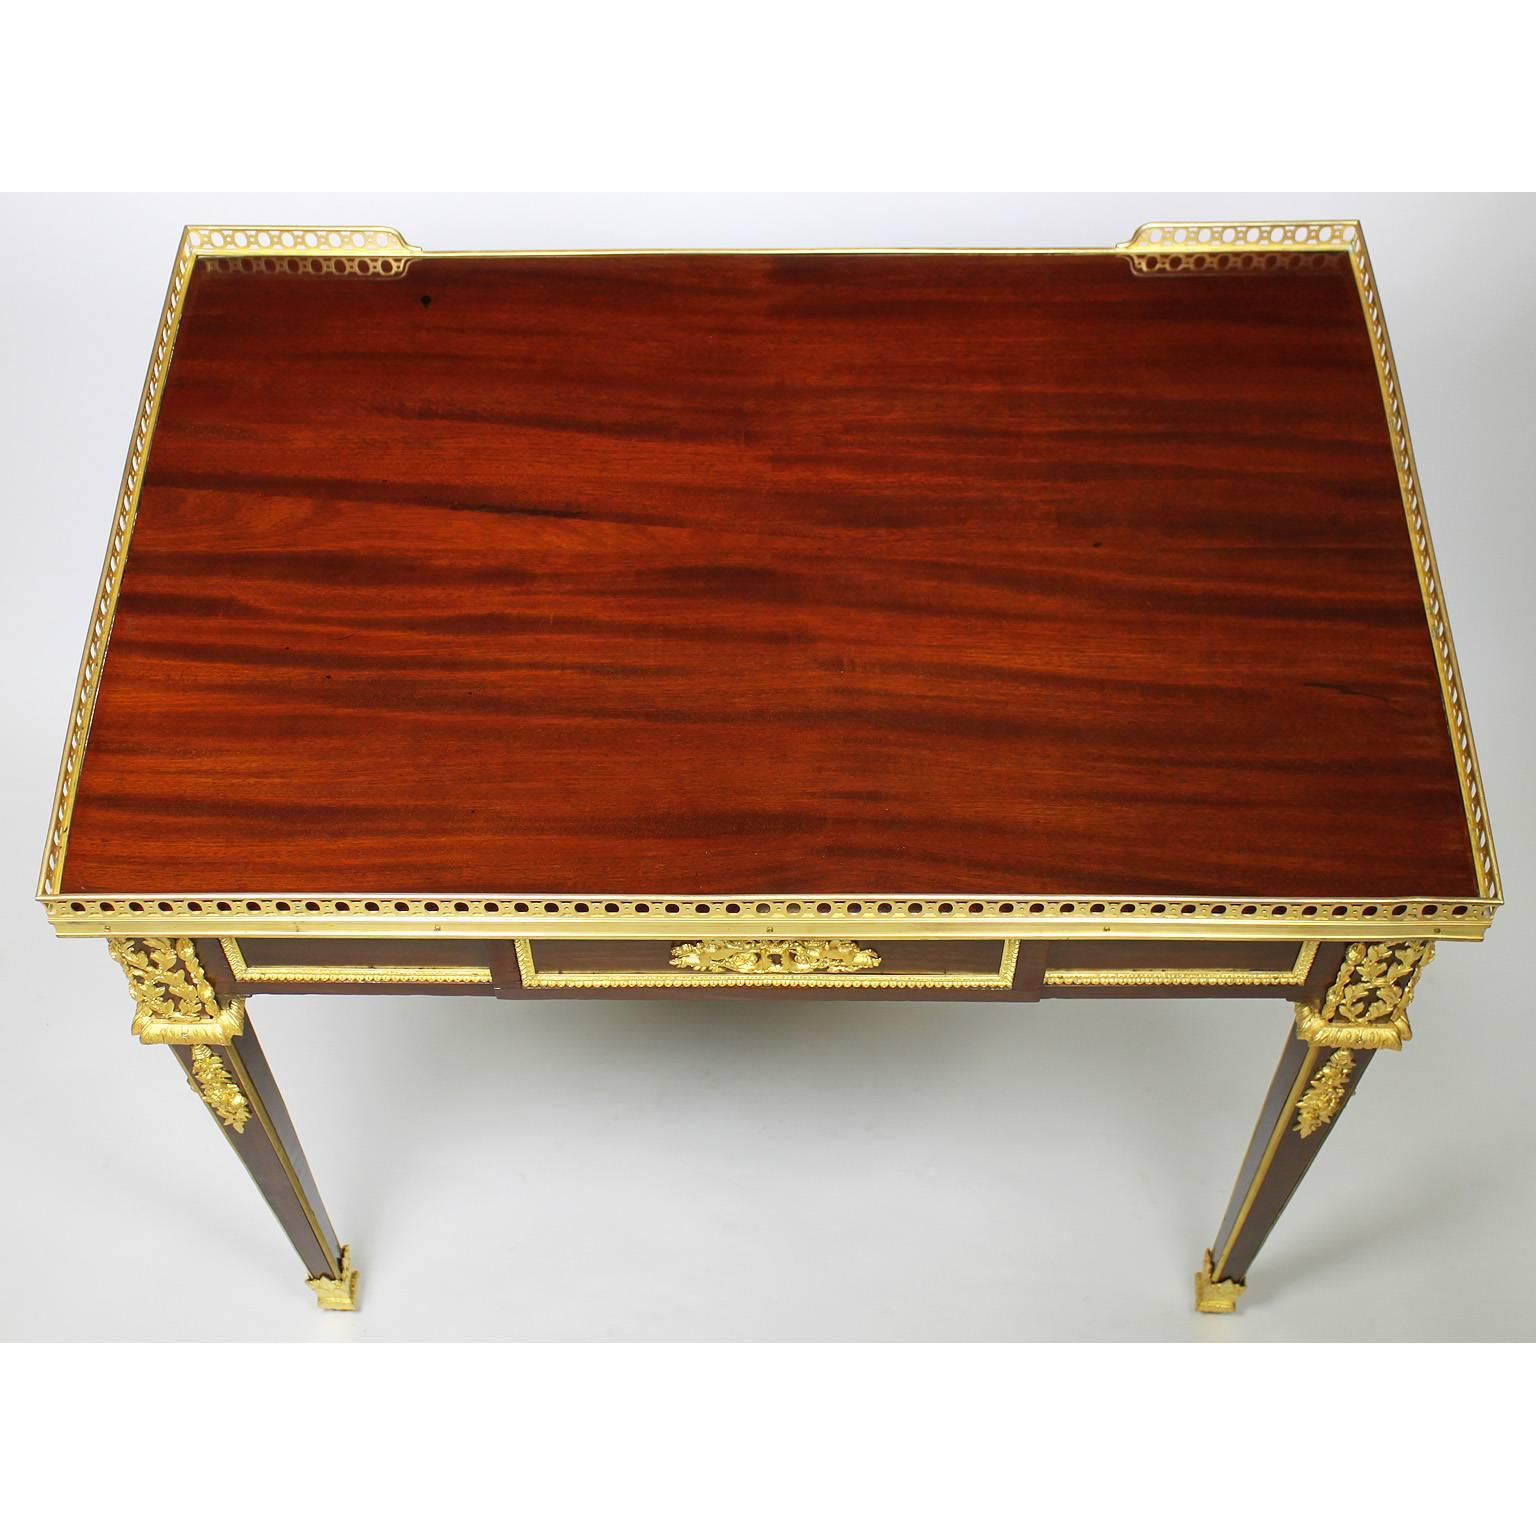 French 19th-20th Century Louis XVI Style Mahogany and Gilt-Bronze Mounted Table 2